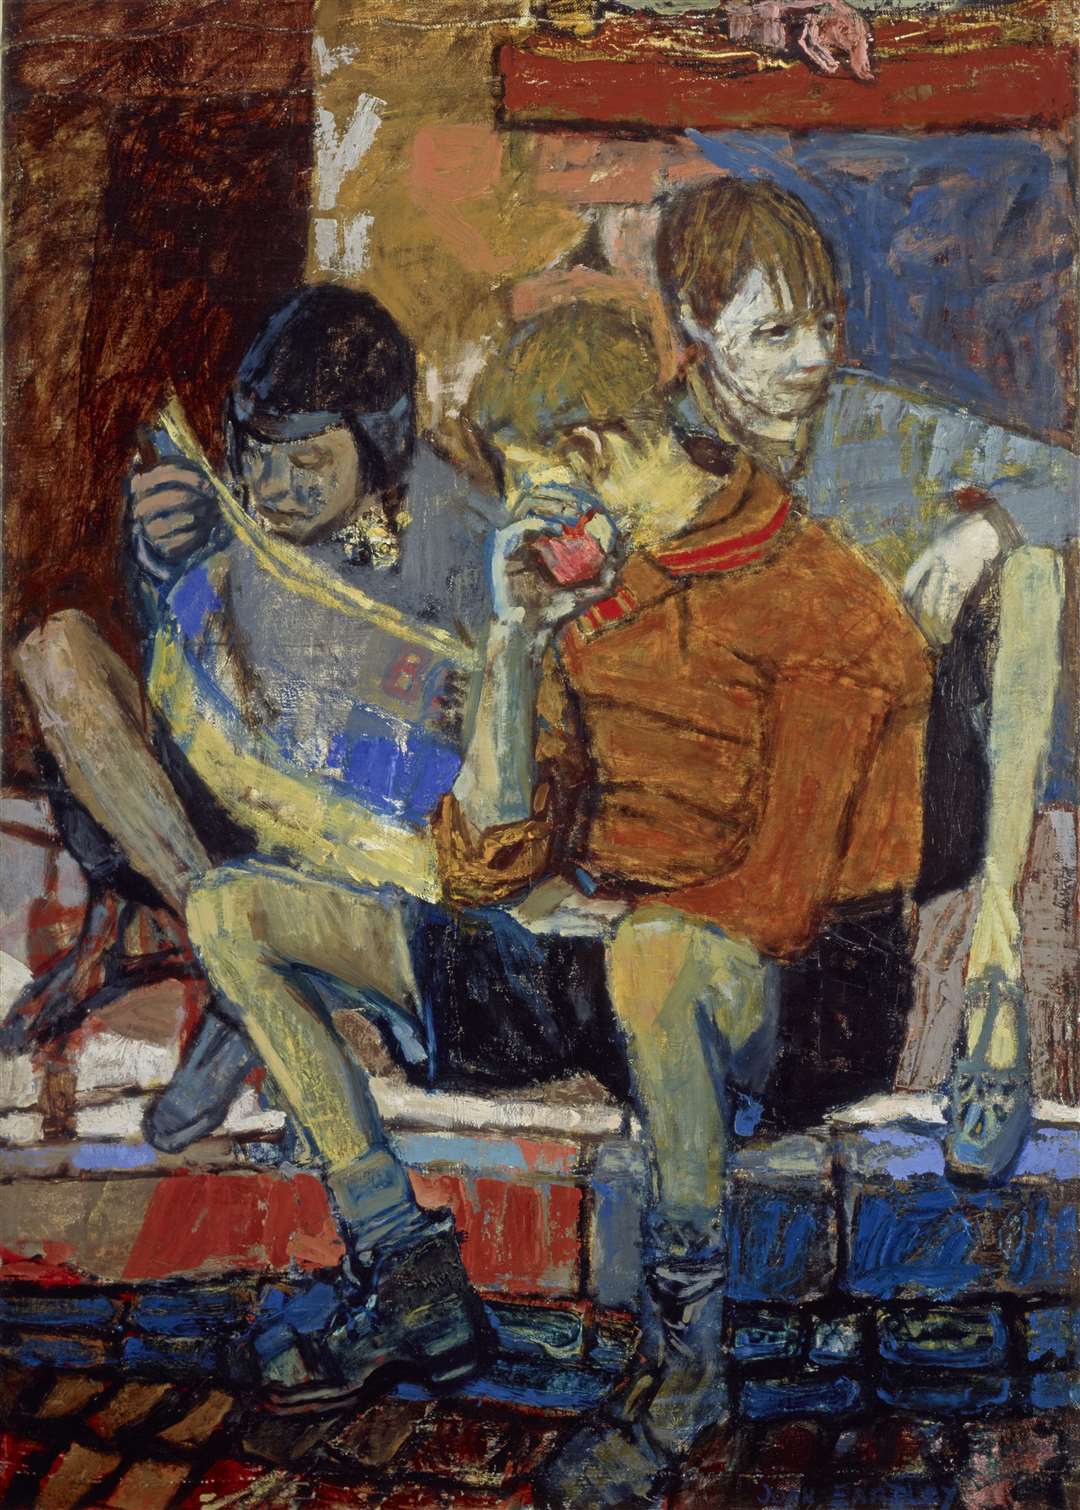 "Street Kids" is an early work from Eardley’s time based in her Townhead studio, a poor, dilapidated part of the city of Glasgow.